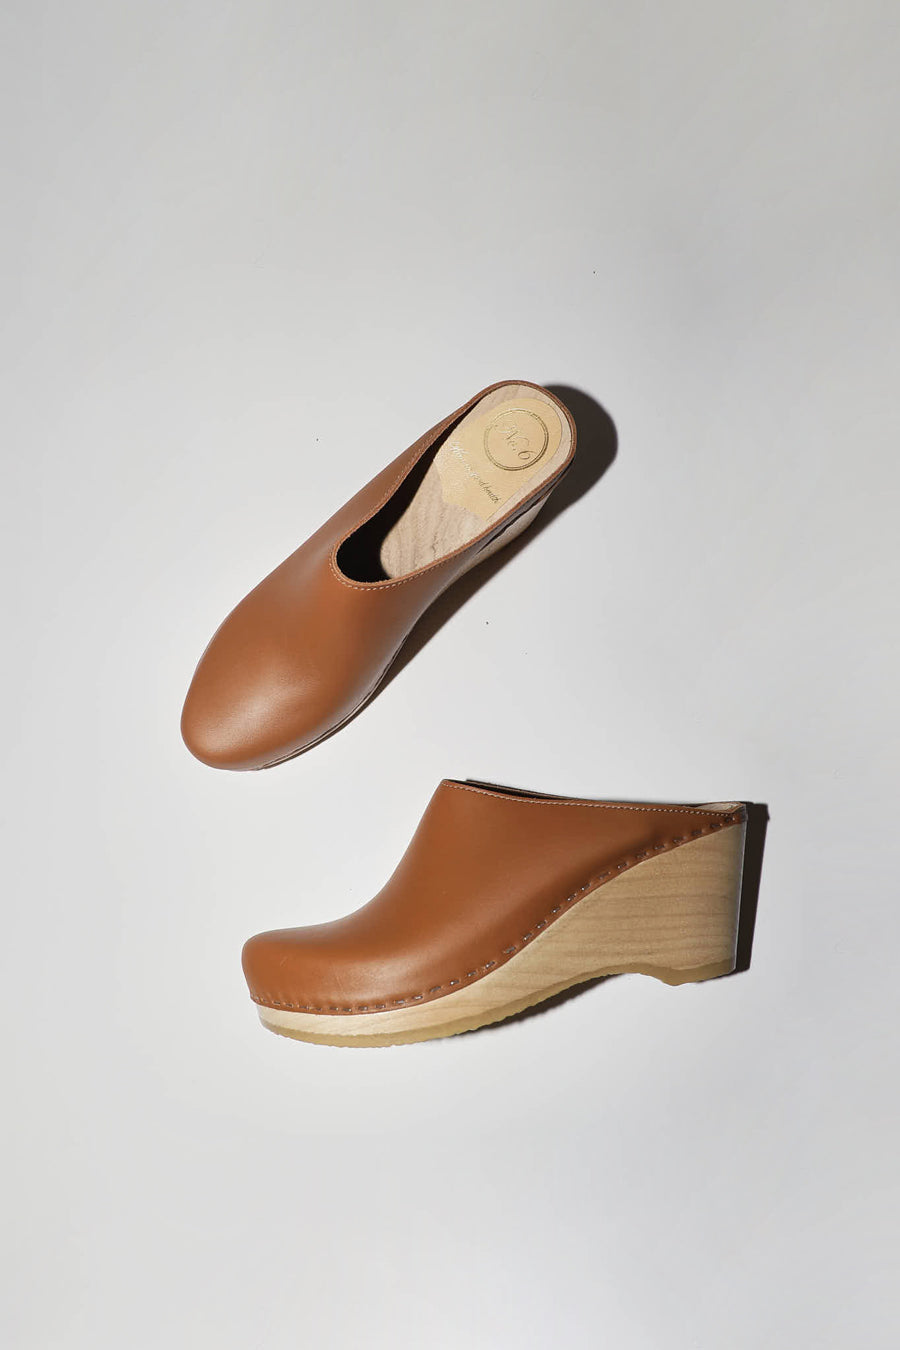 No.6 New School Clog on Wedge in Palomino